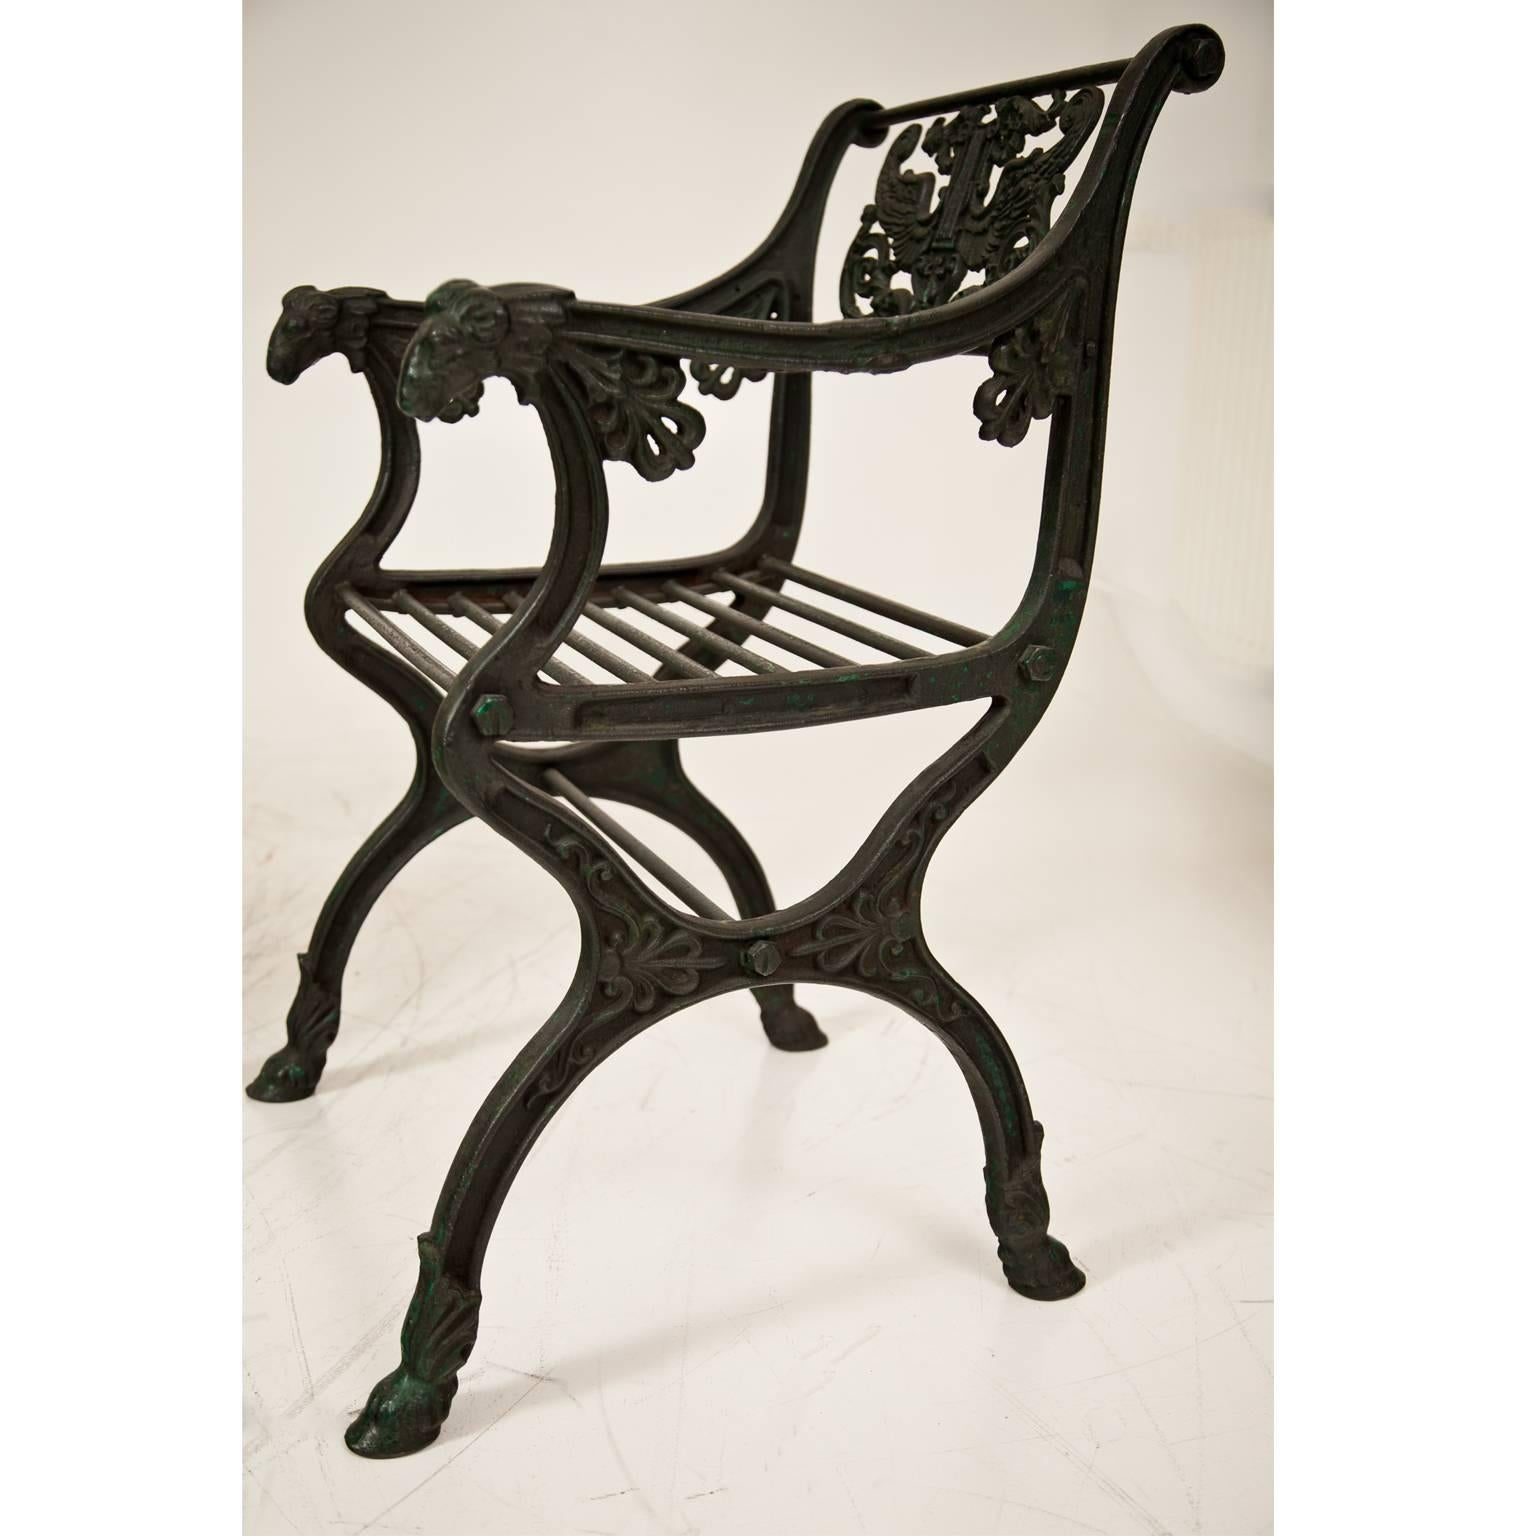 Pair of cast iron garden chair after a design by Karl Friedrich Schinkel (1781-1841) for the Roman Baths in Potsdam. The design is probably from circa 1830. The chairs show goat's feet and ram's heads. The backrest is decorated with a lyra, carried